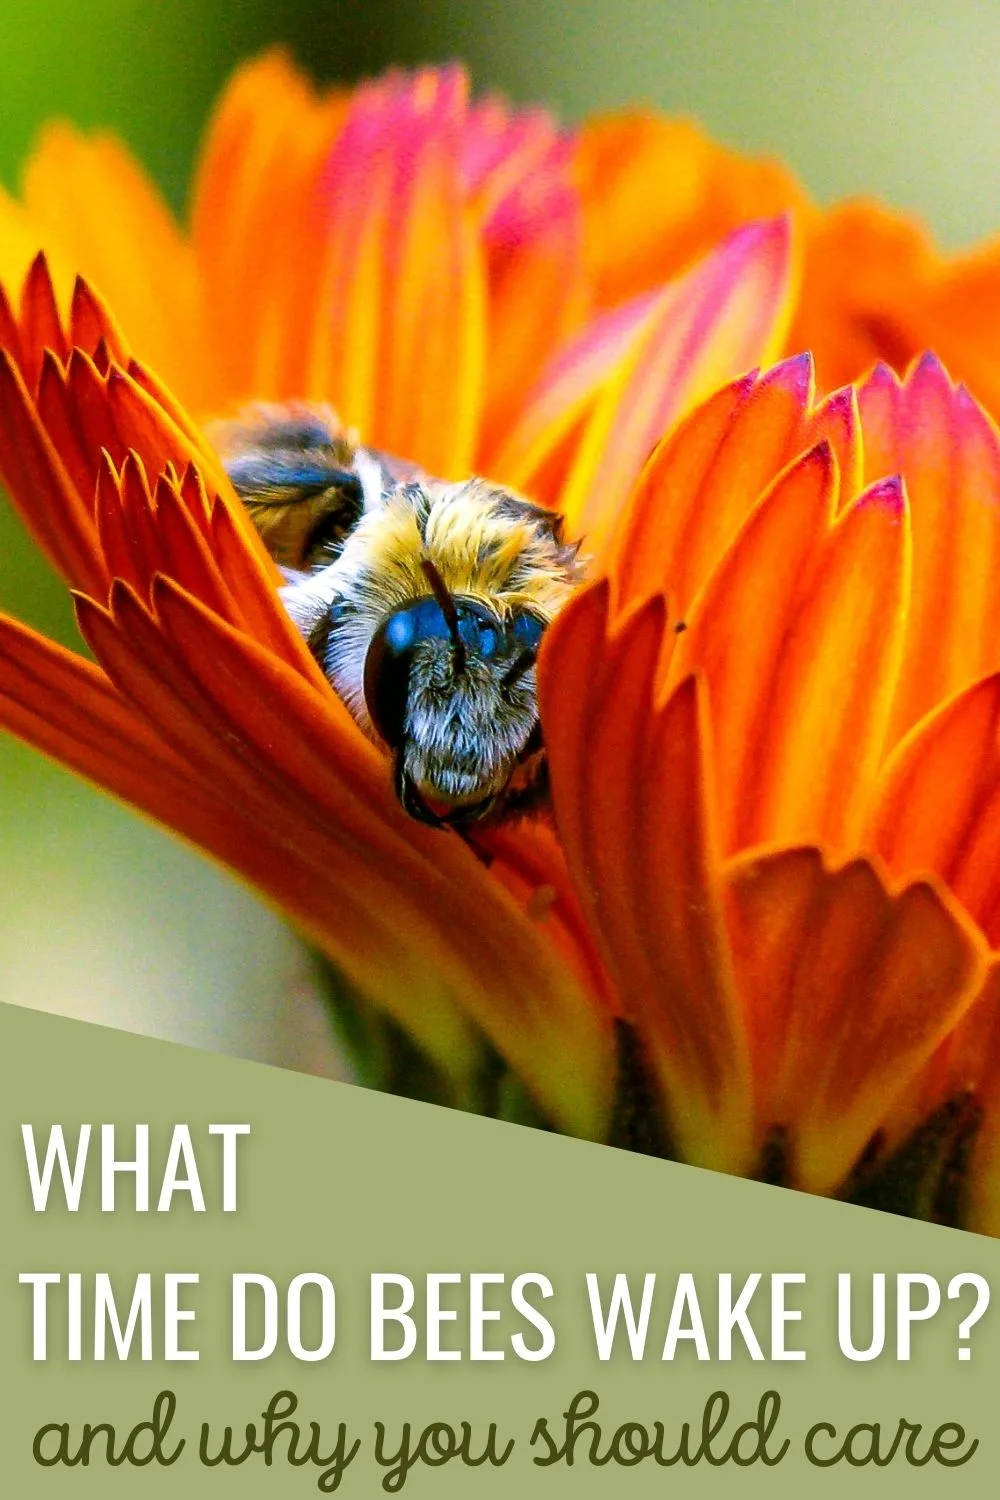 What time do bees wake up, and why should you care